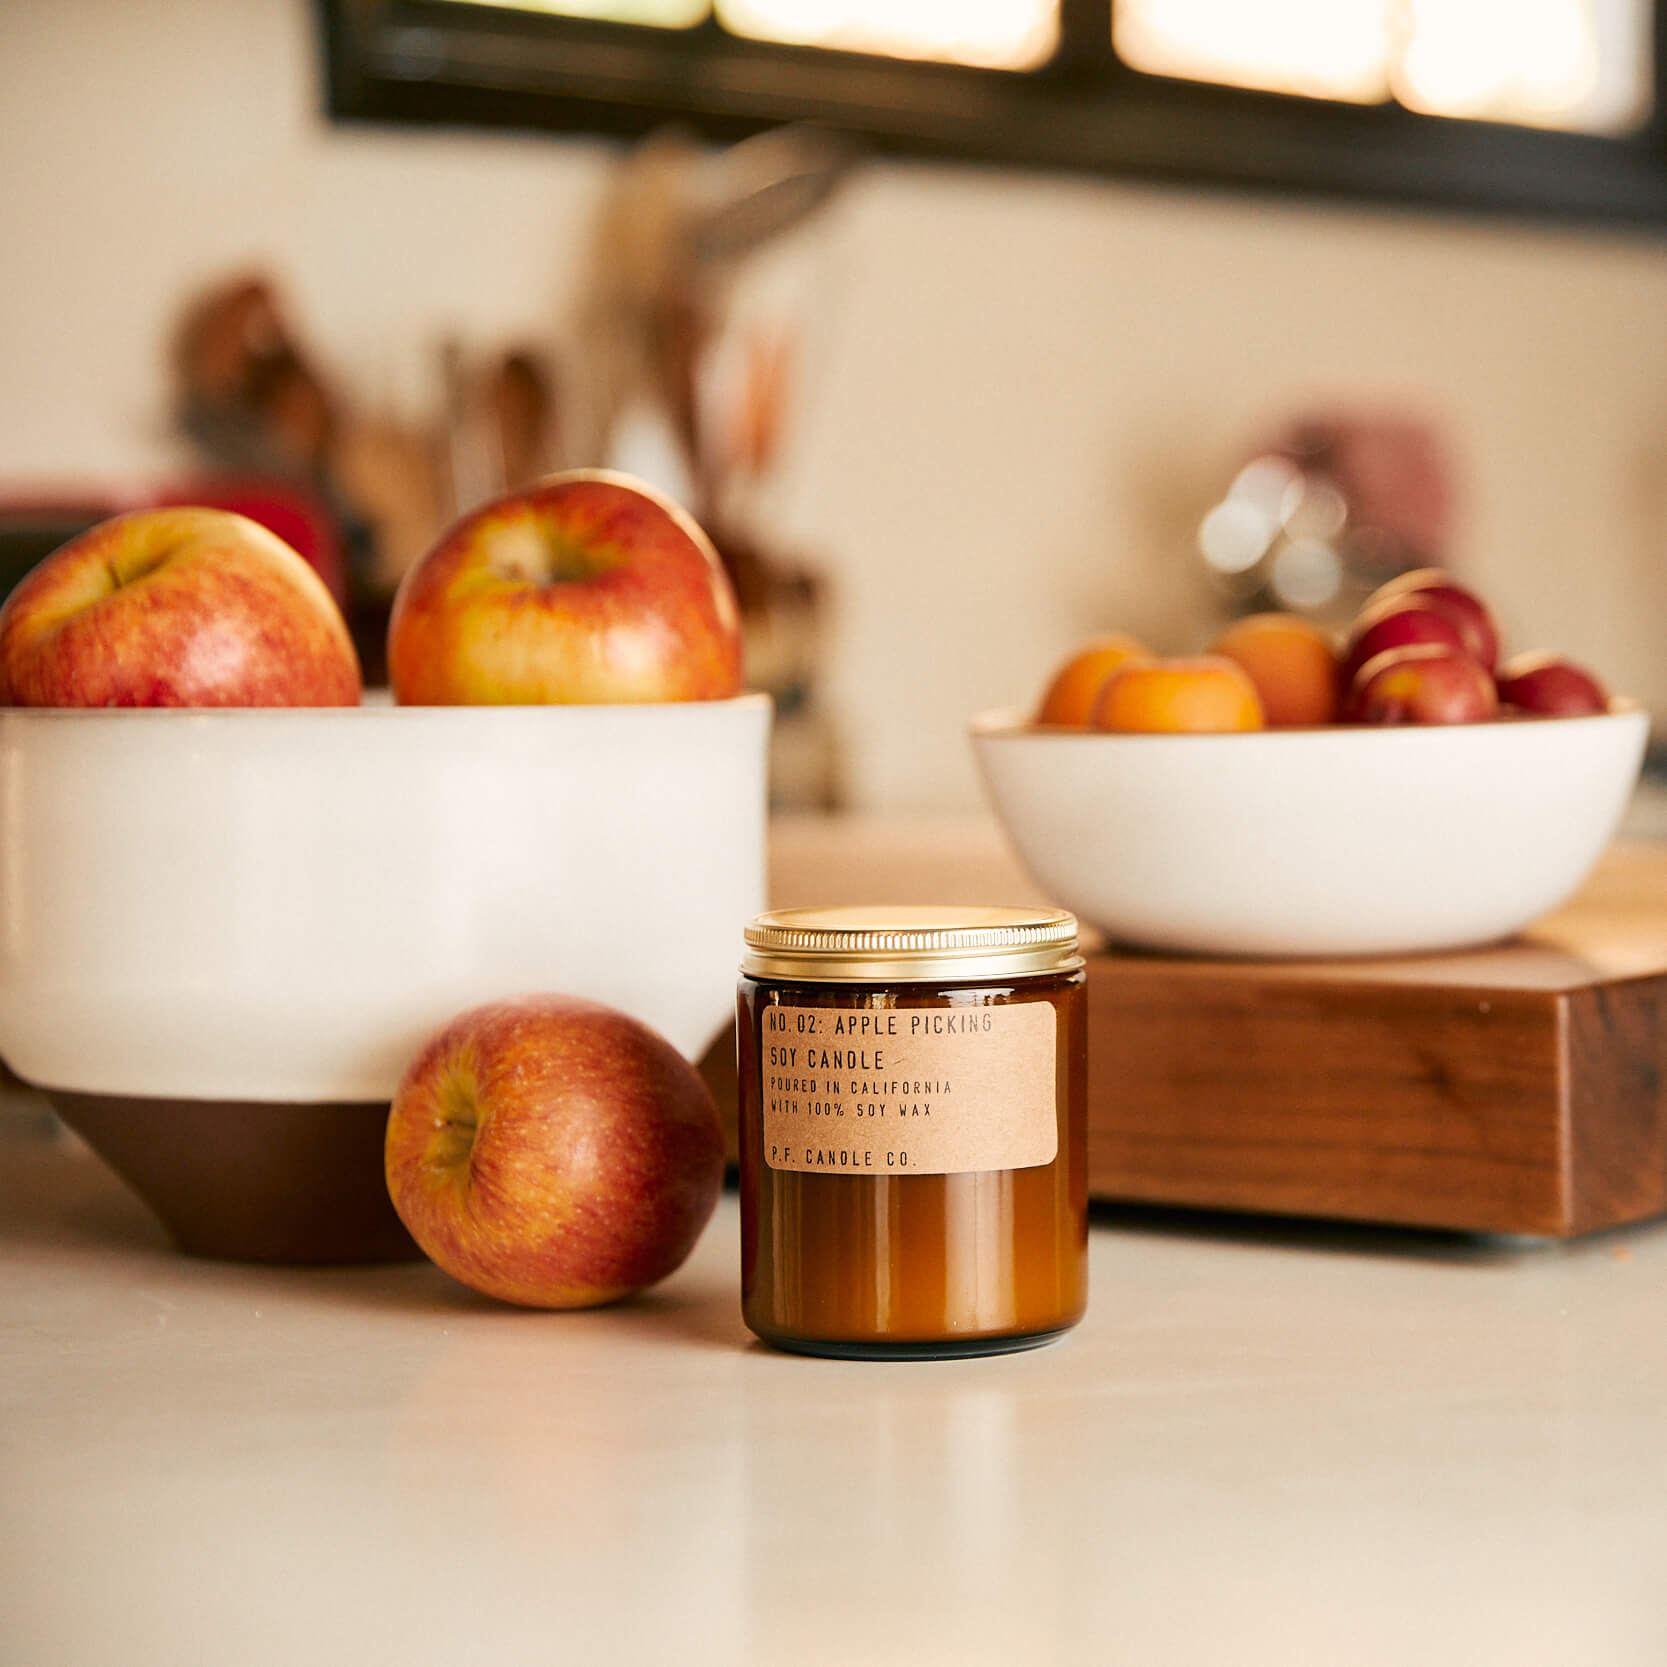 P.F. Candle Co. Apple Picking Scented Candle - Osmology Scented Candles & Home Fragrance